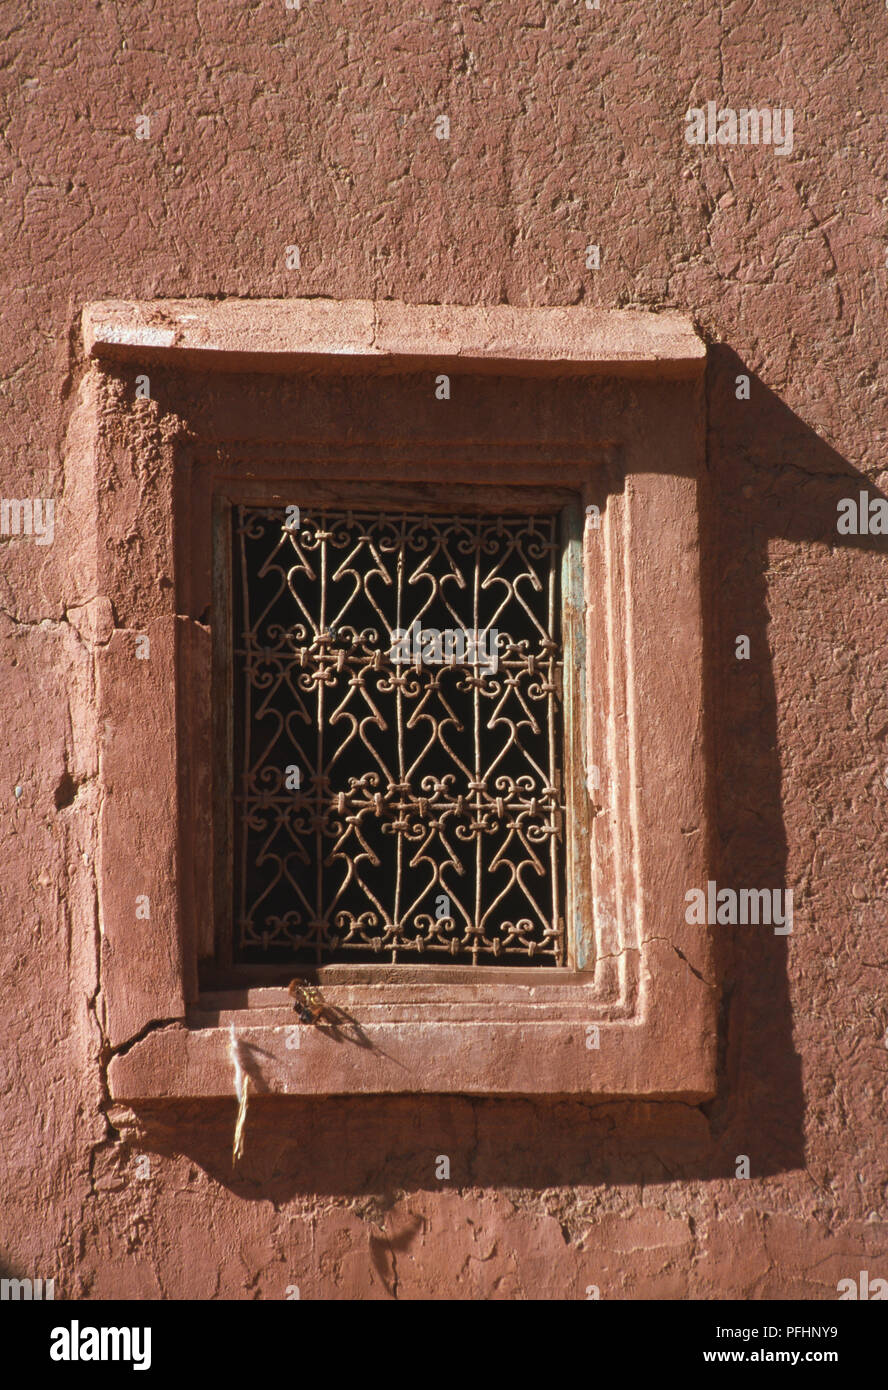 Morocco, The Kasbah, Ouarzazate and The Southern Oasis, window with wrought-iron grille. Stock Photo